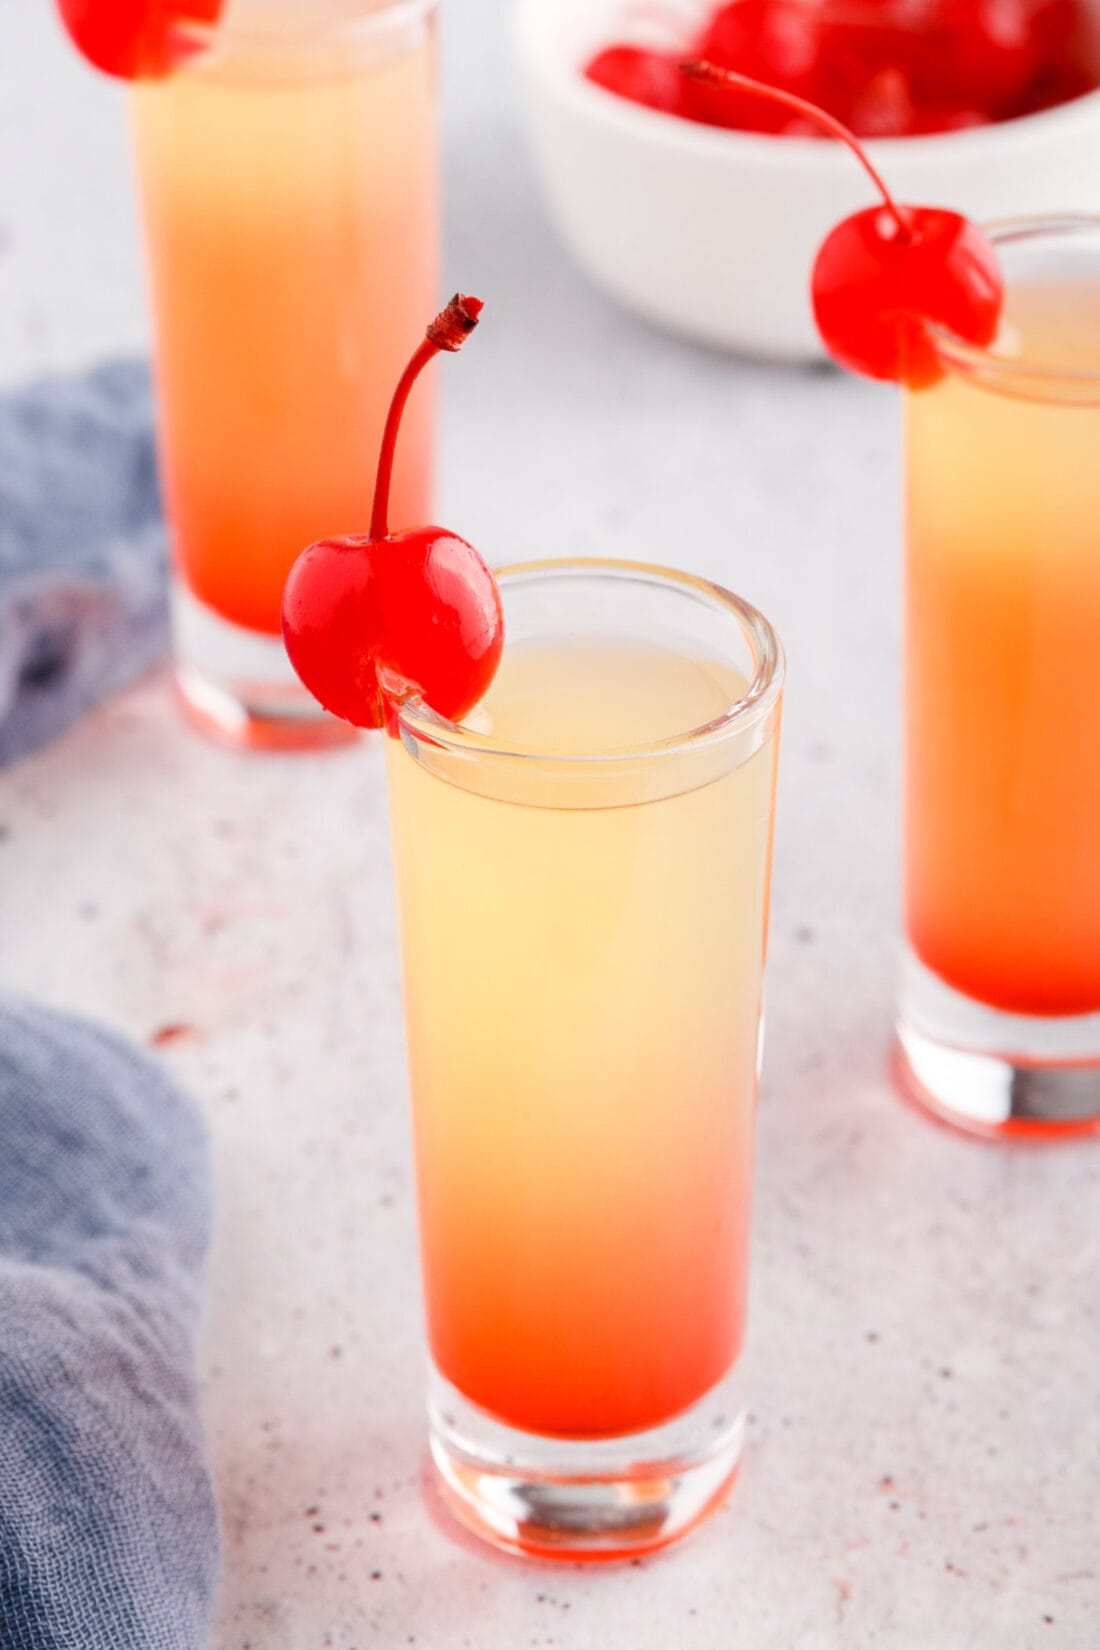 Pineapple Upside Down Cake Shot garnished with a cherry